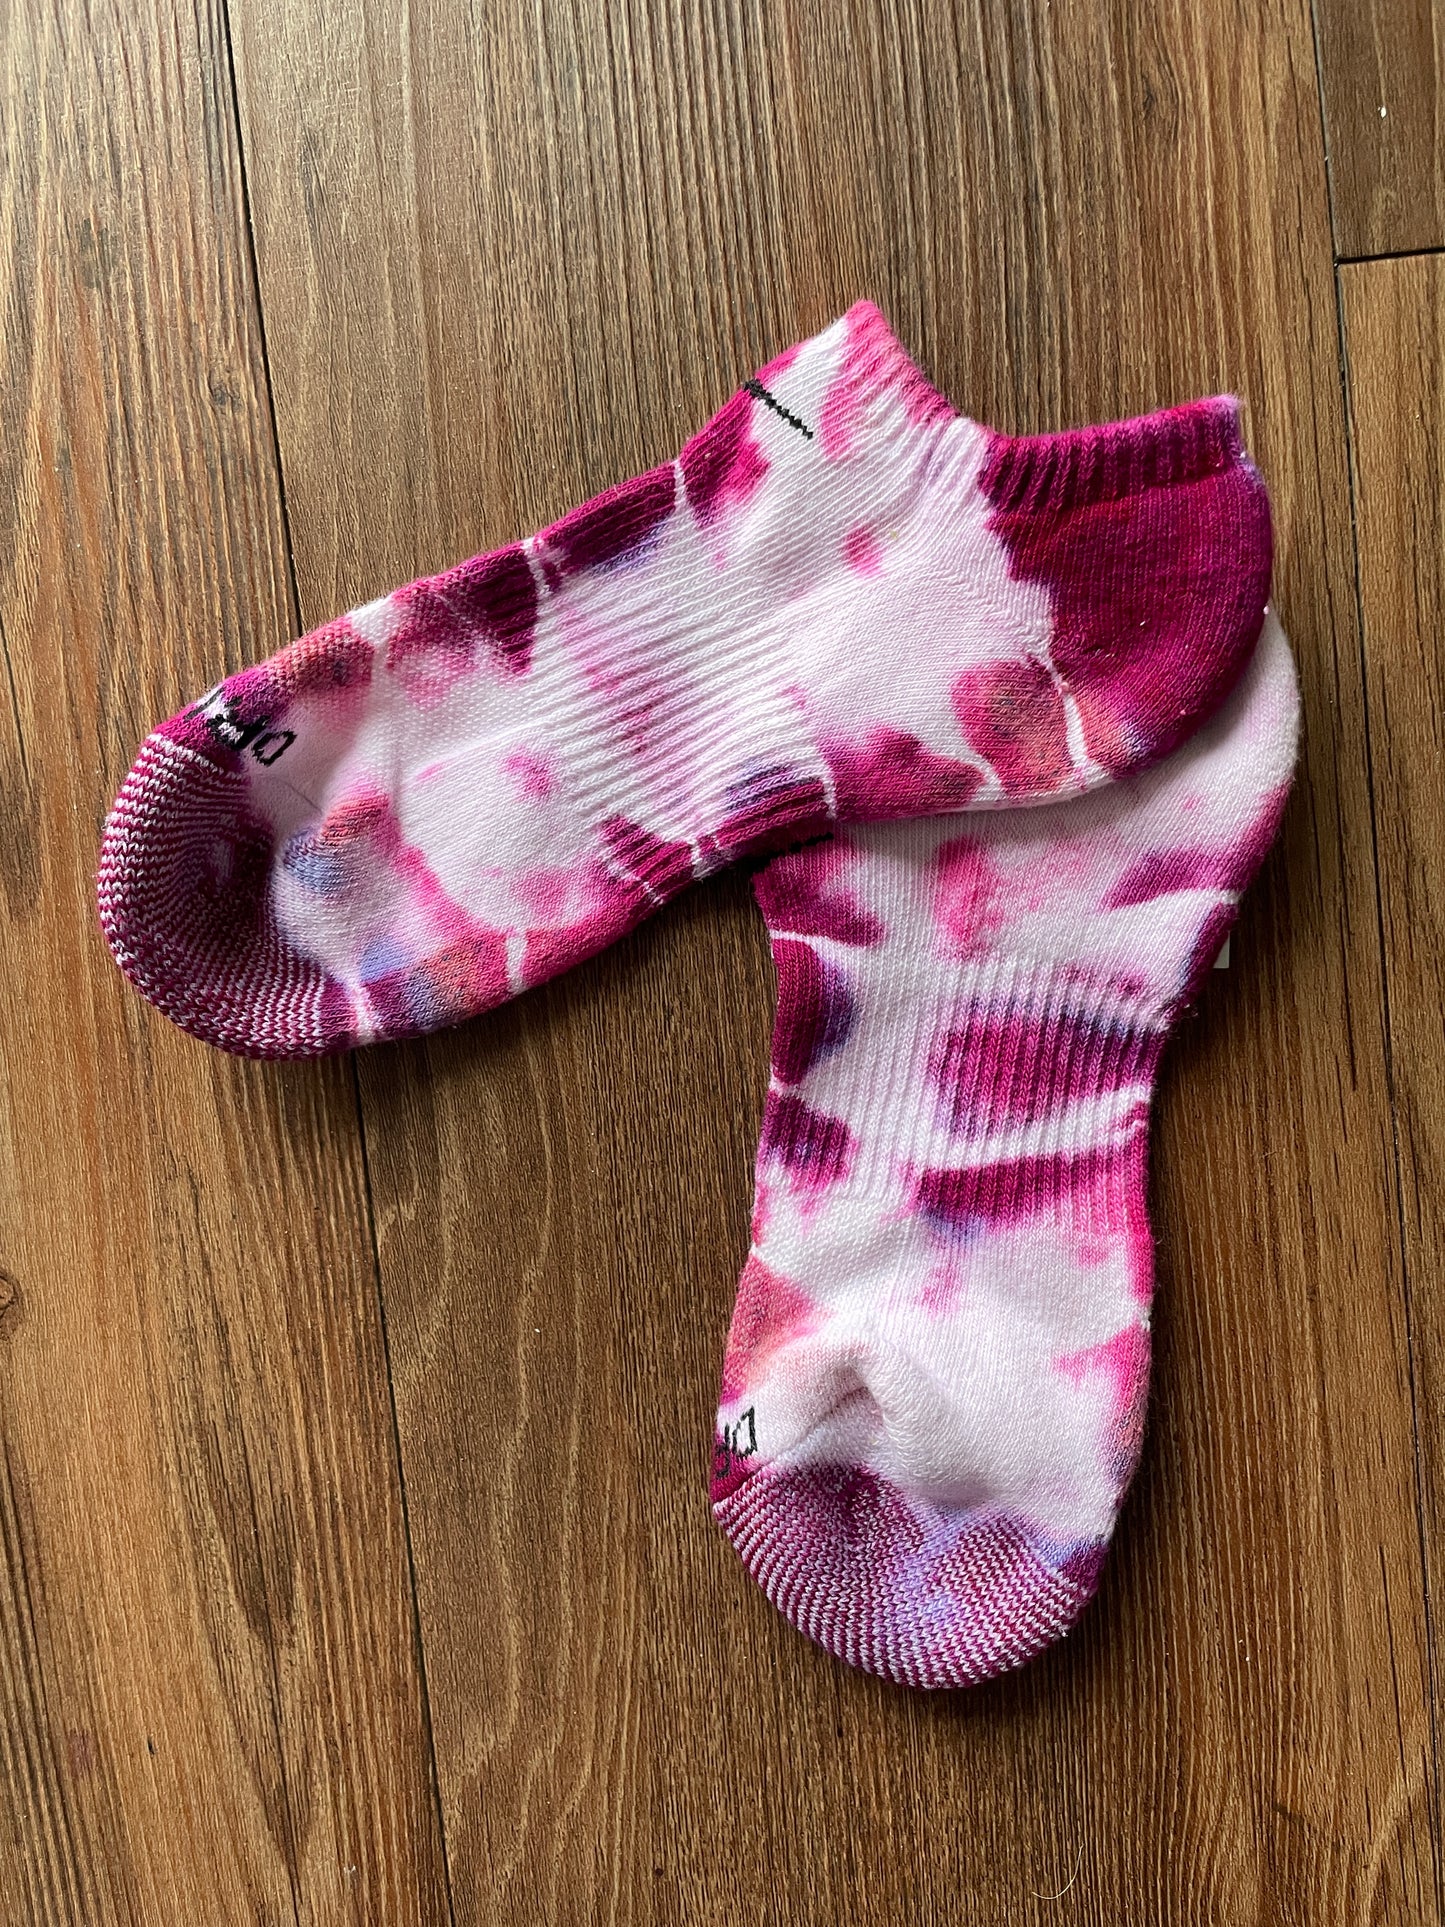 Shades of Pink and White Tie Dye Nike Dri-FIT Everyday Plus Ankle Socks - Size Medium (Men's 6-8/Women's 7-10)